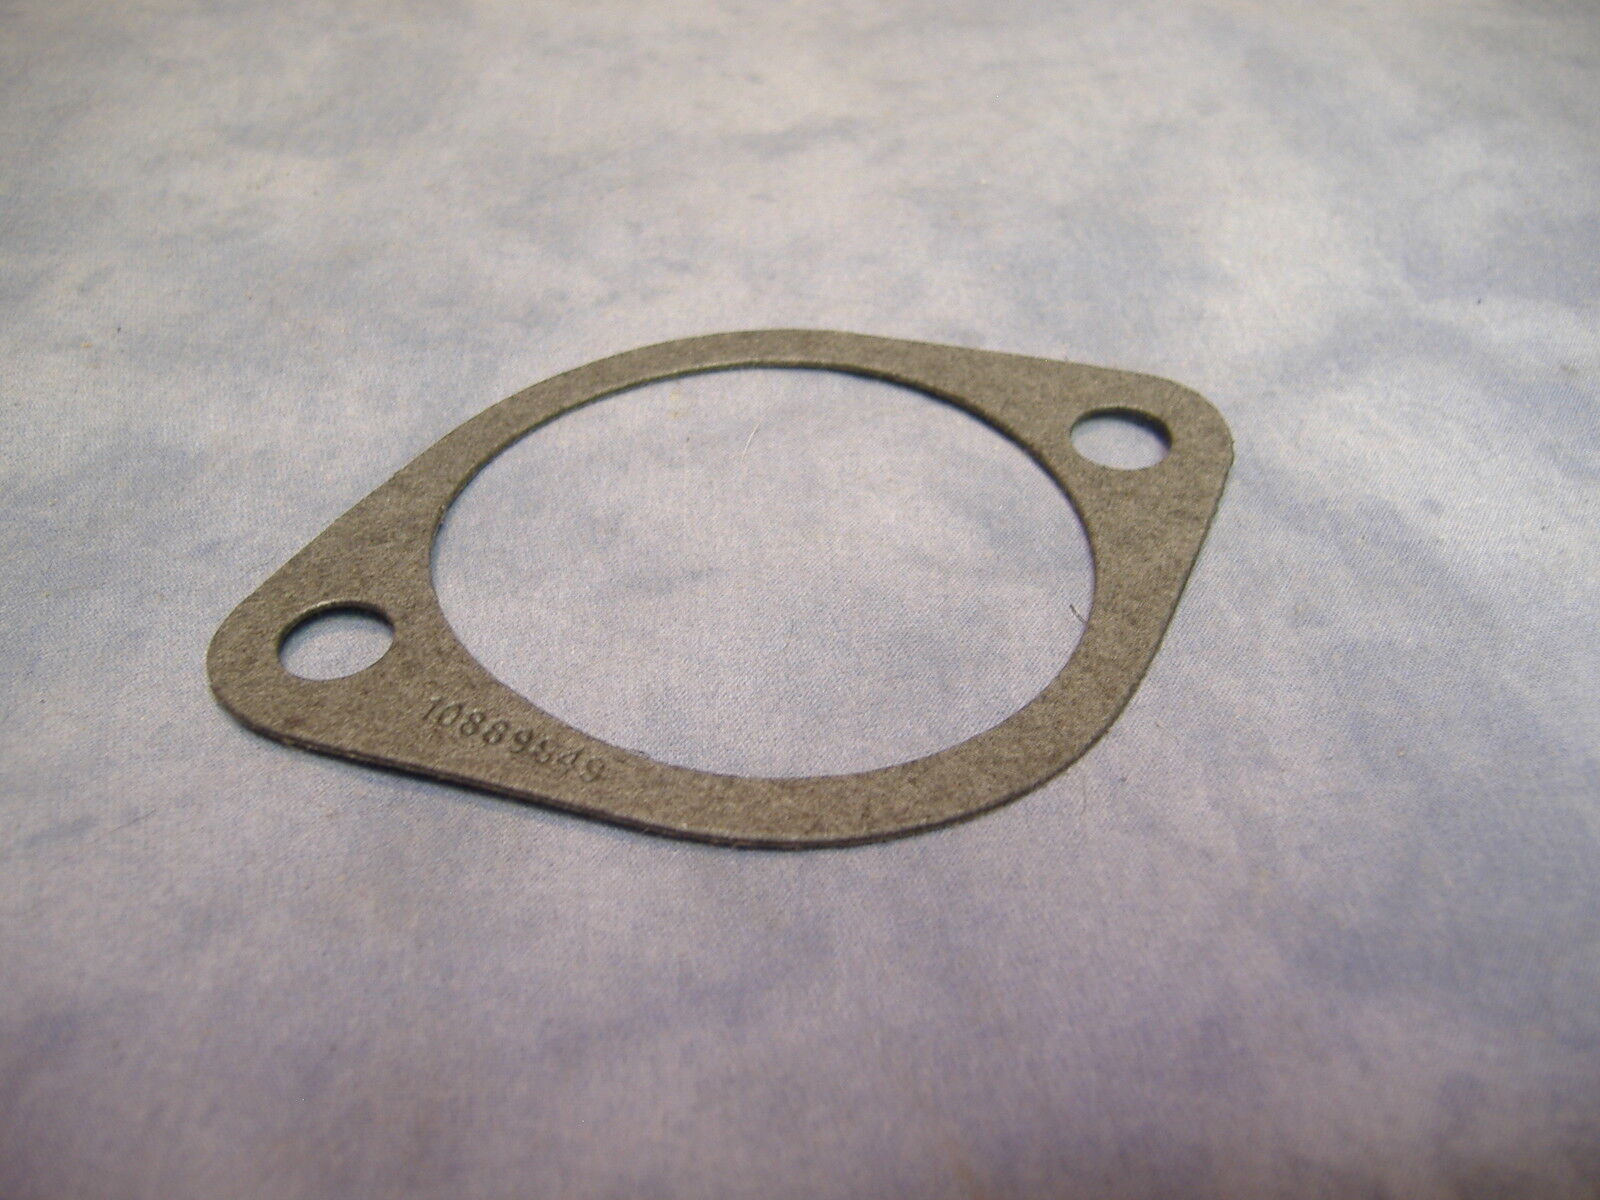 MILITARY 2.5 TON THERMOSTAT GASKET M35 M35A2 MULTIFUEL M54